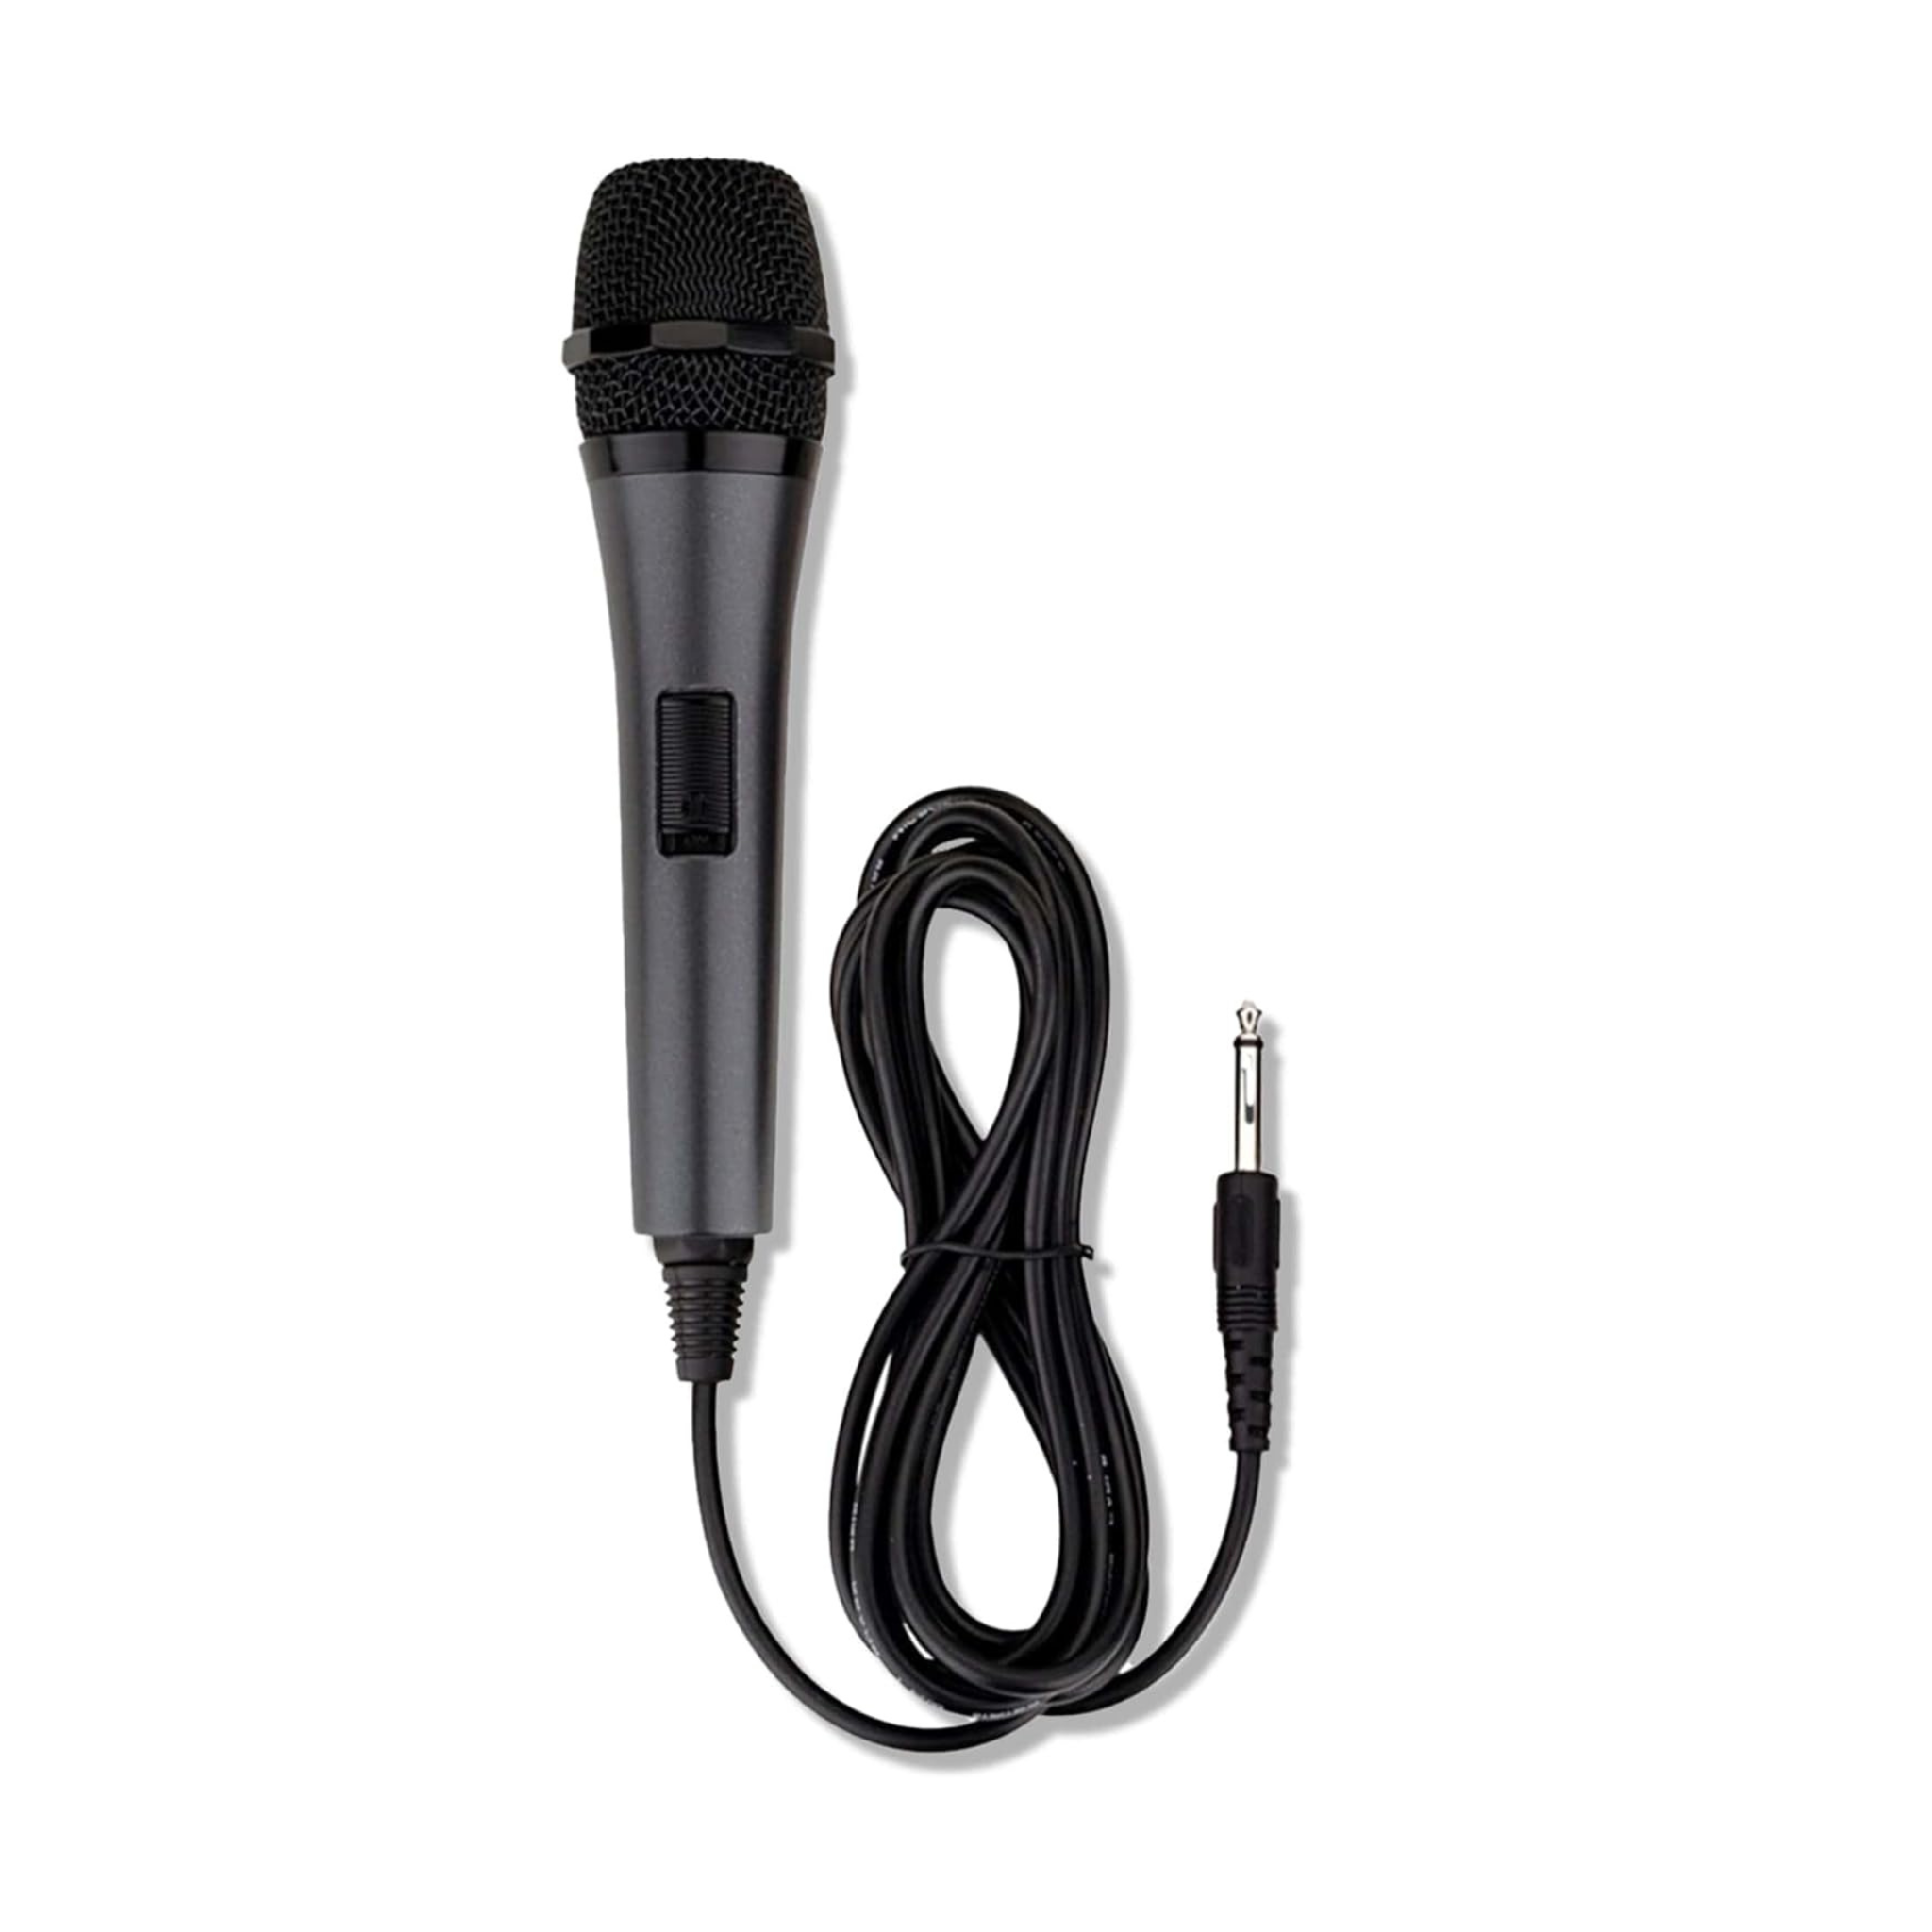 Singing Machine Wired Microphones for Karaoke (2 Colors)